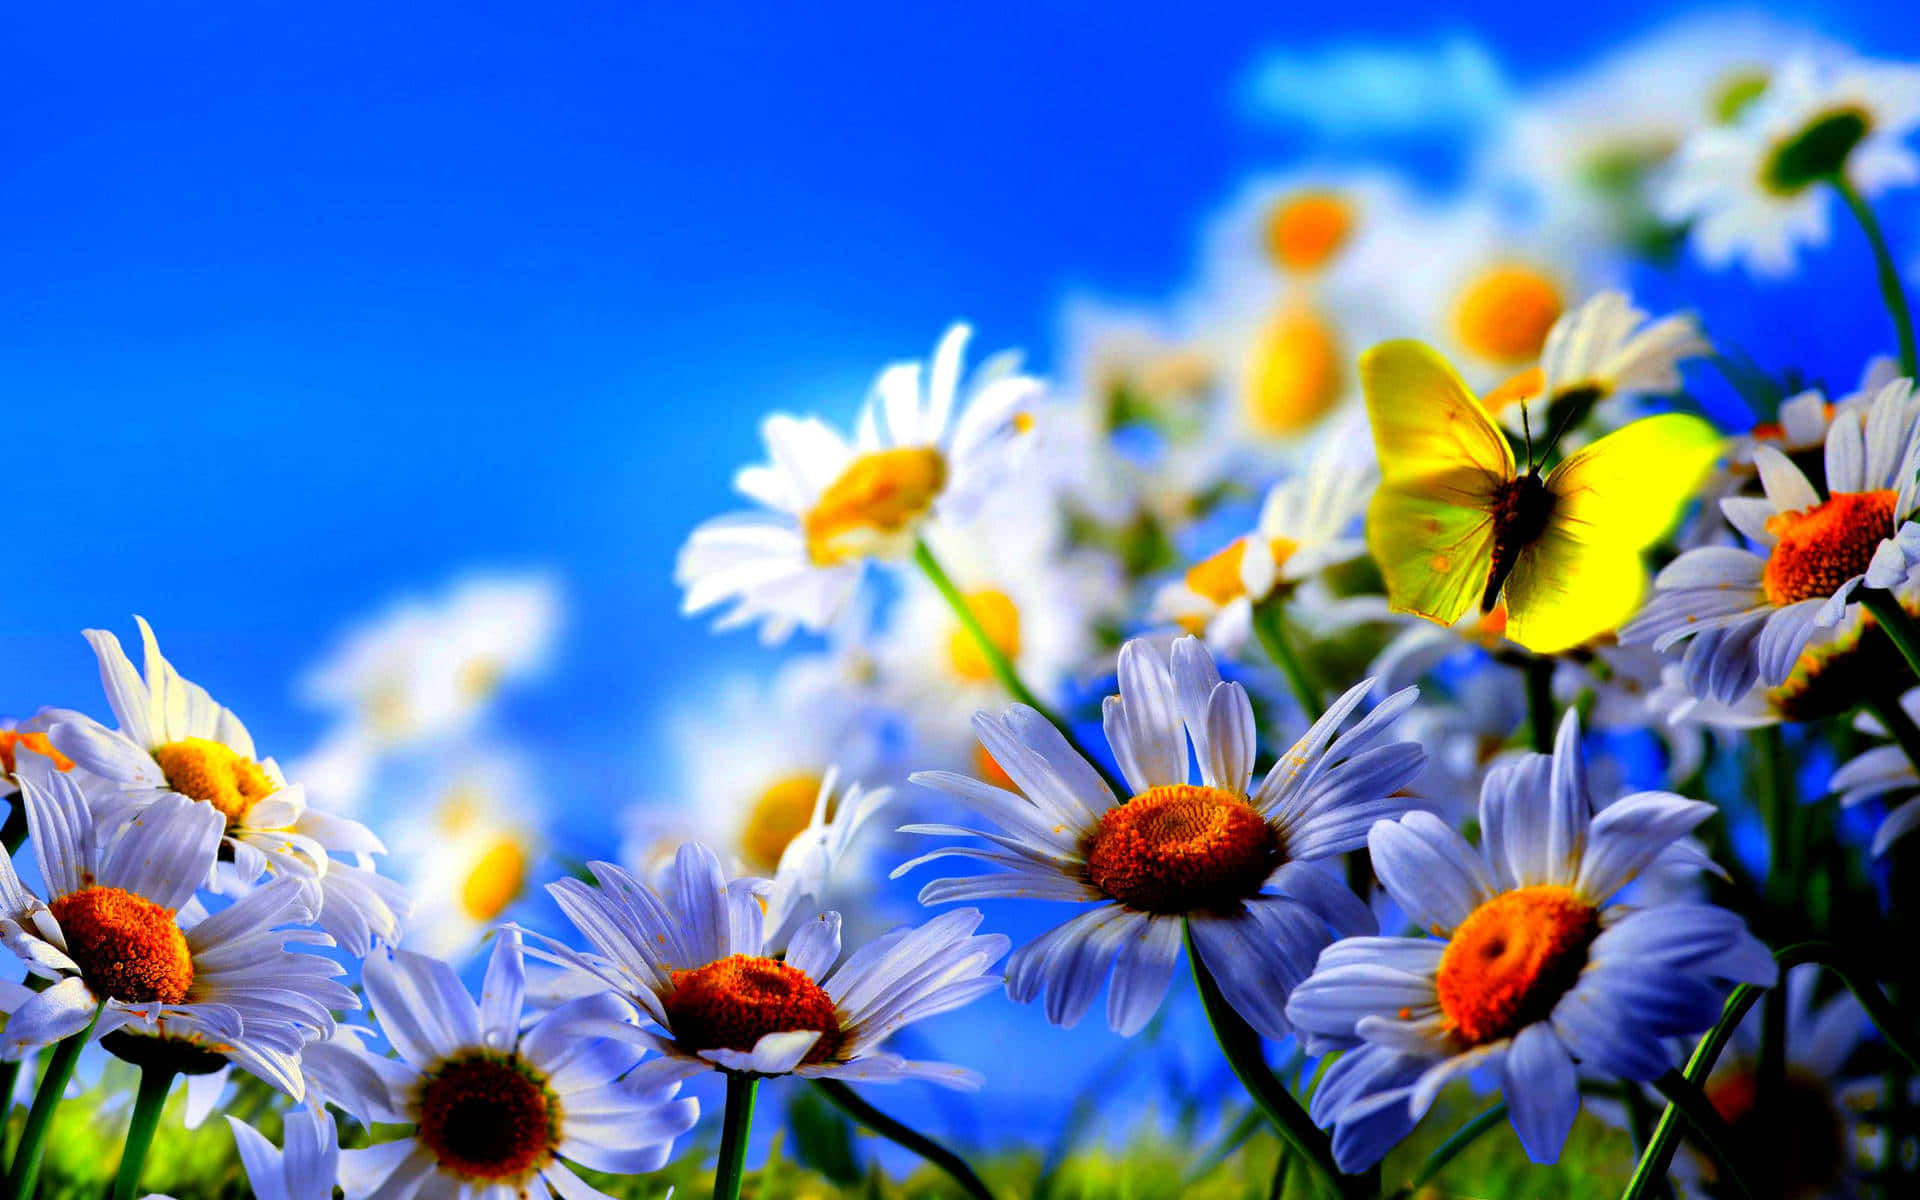 Daisies Screen Saver Picture